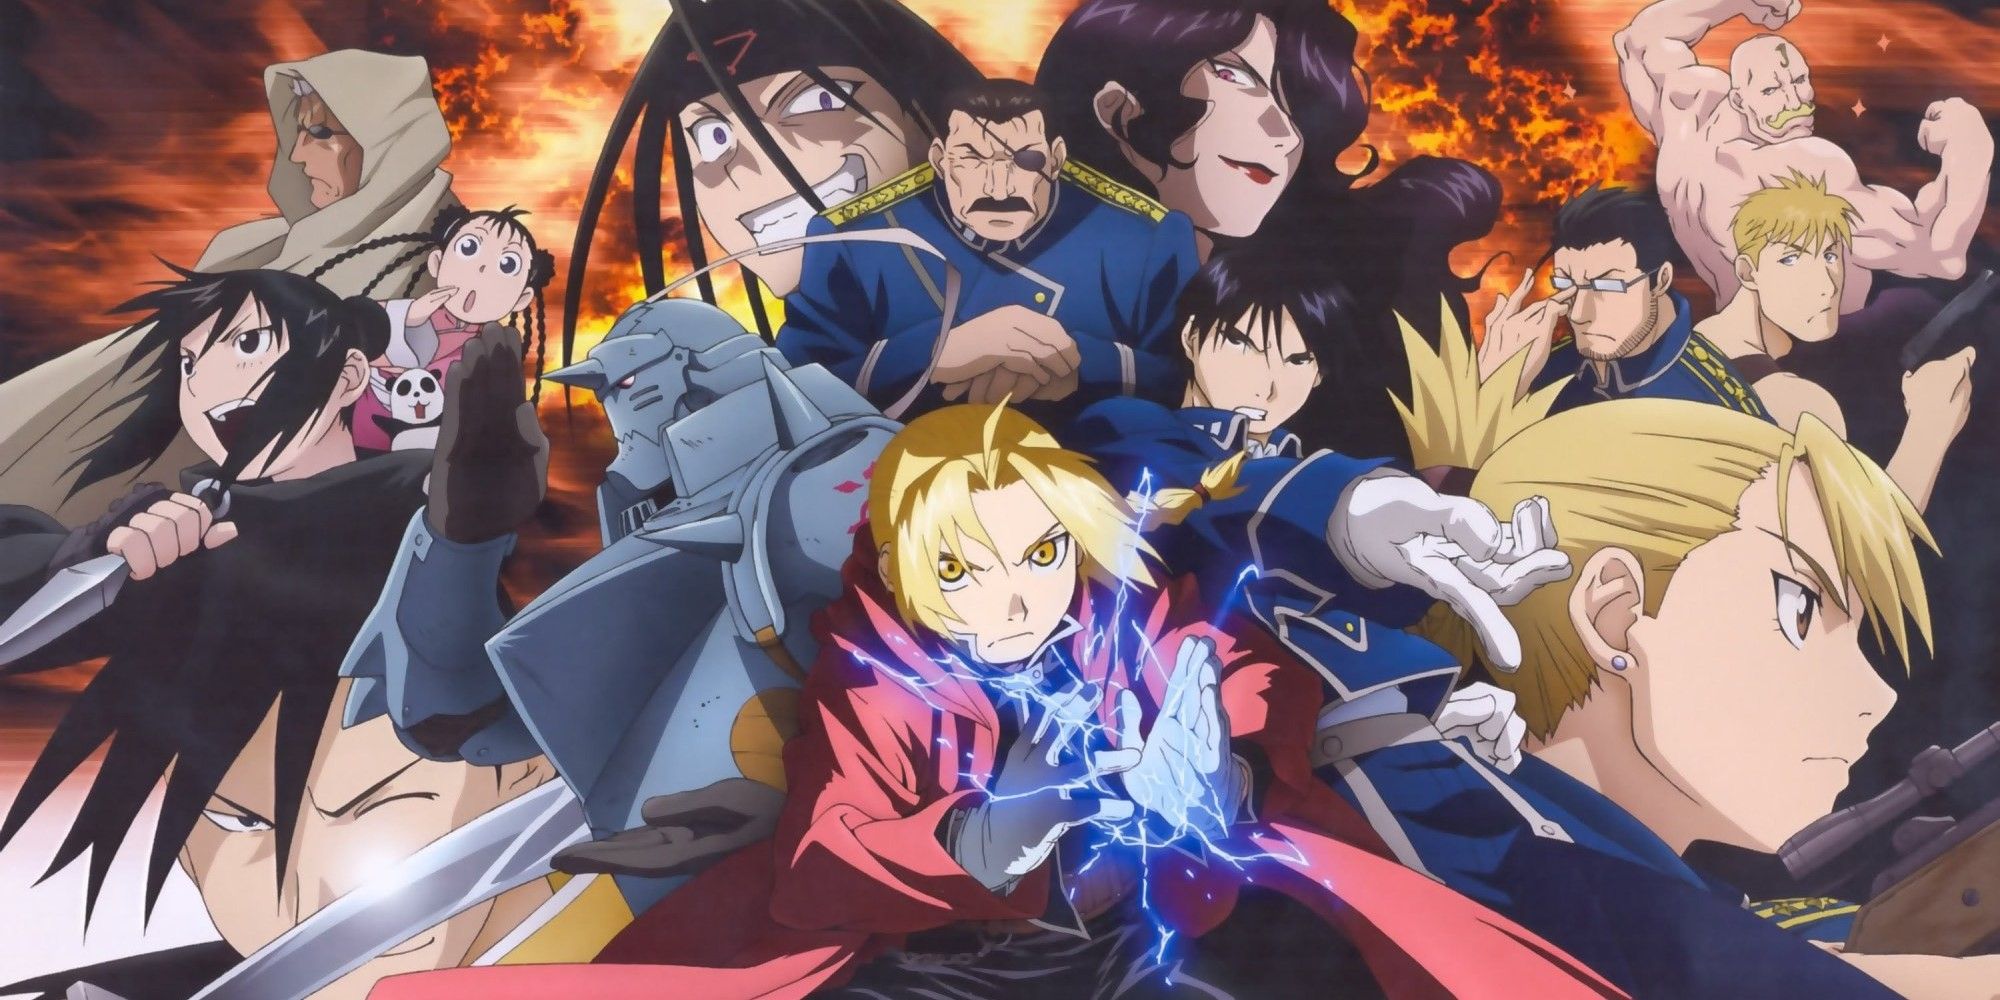 All the characters of Fullmetal Alchemist: Brotherhood in one picture